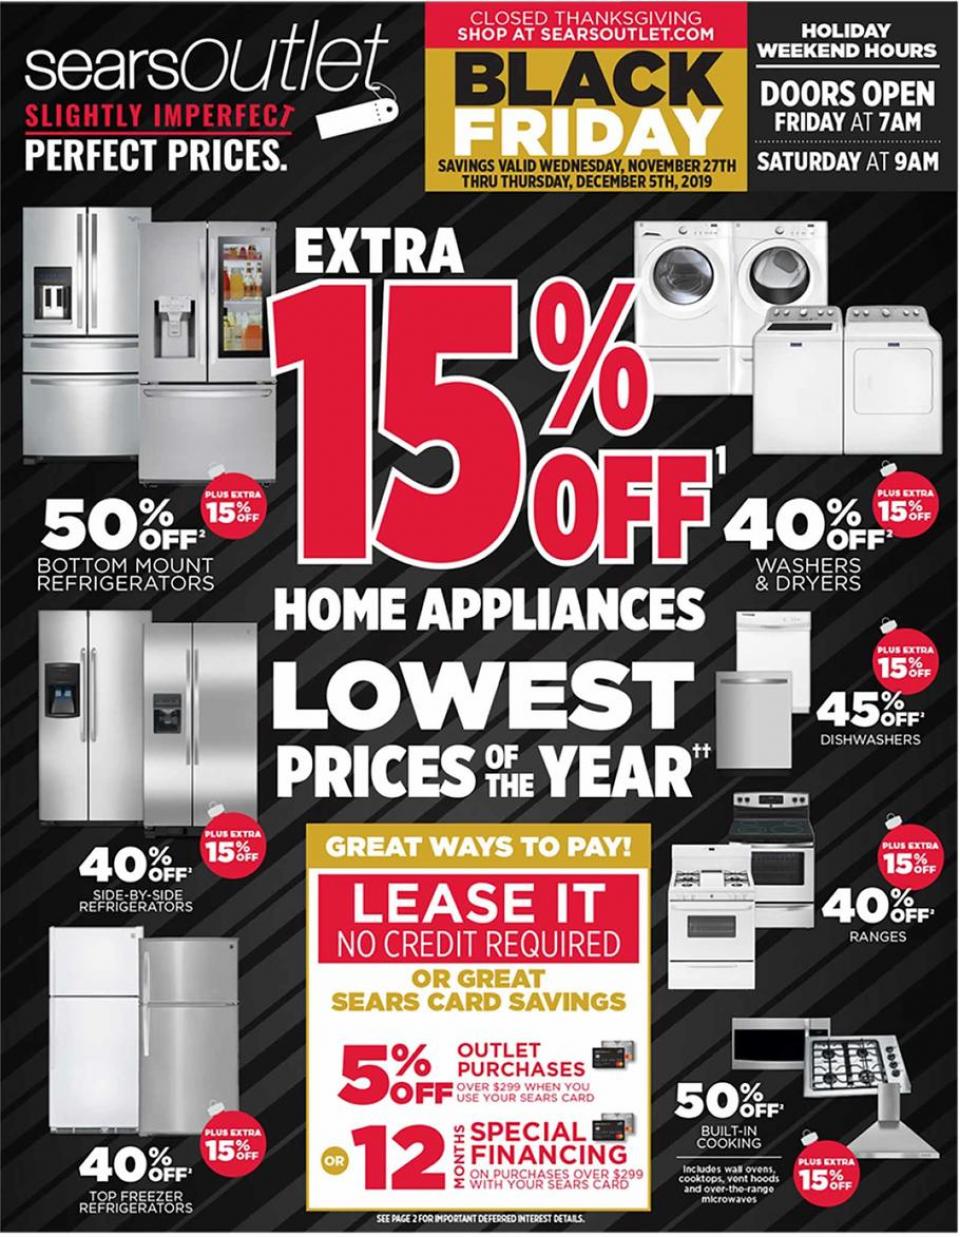 Sears Outlet black friday ad